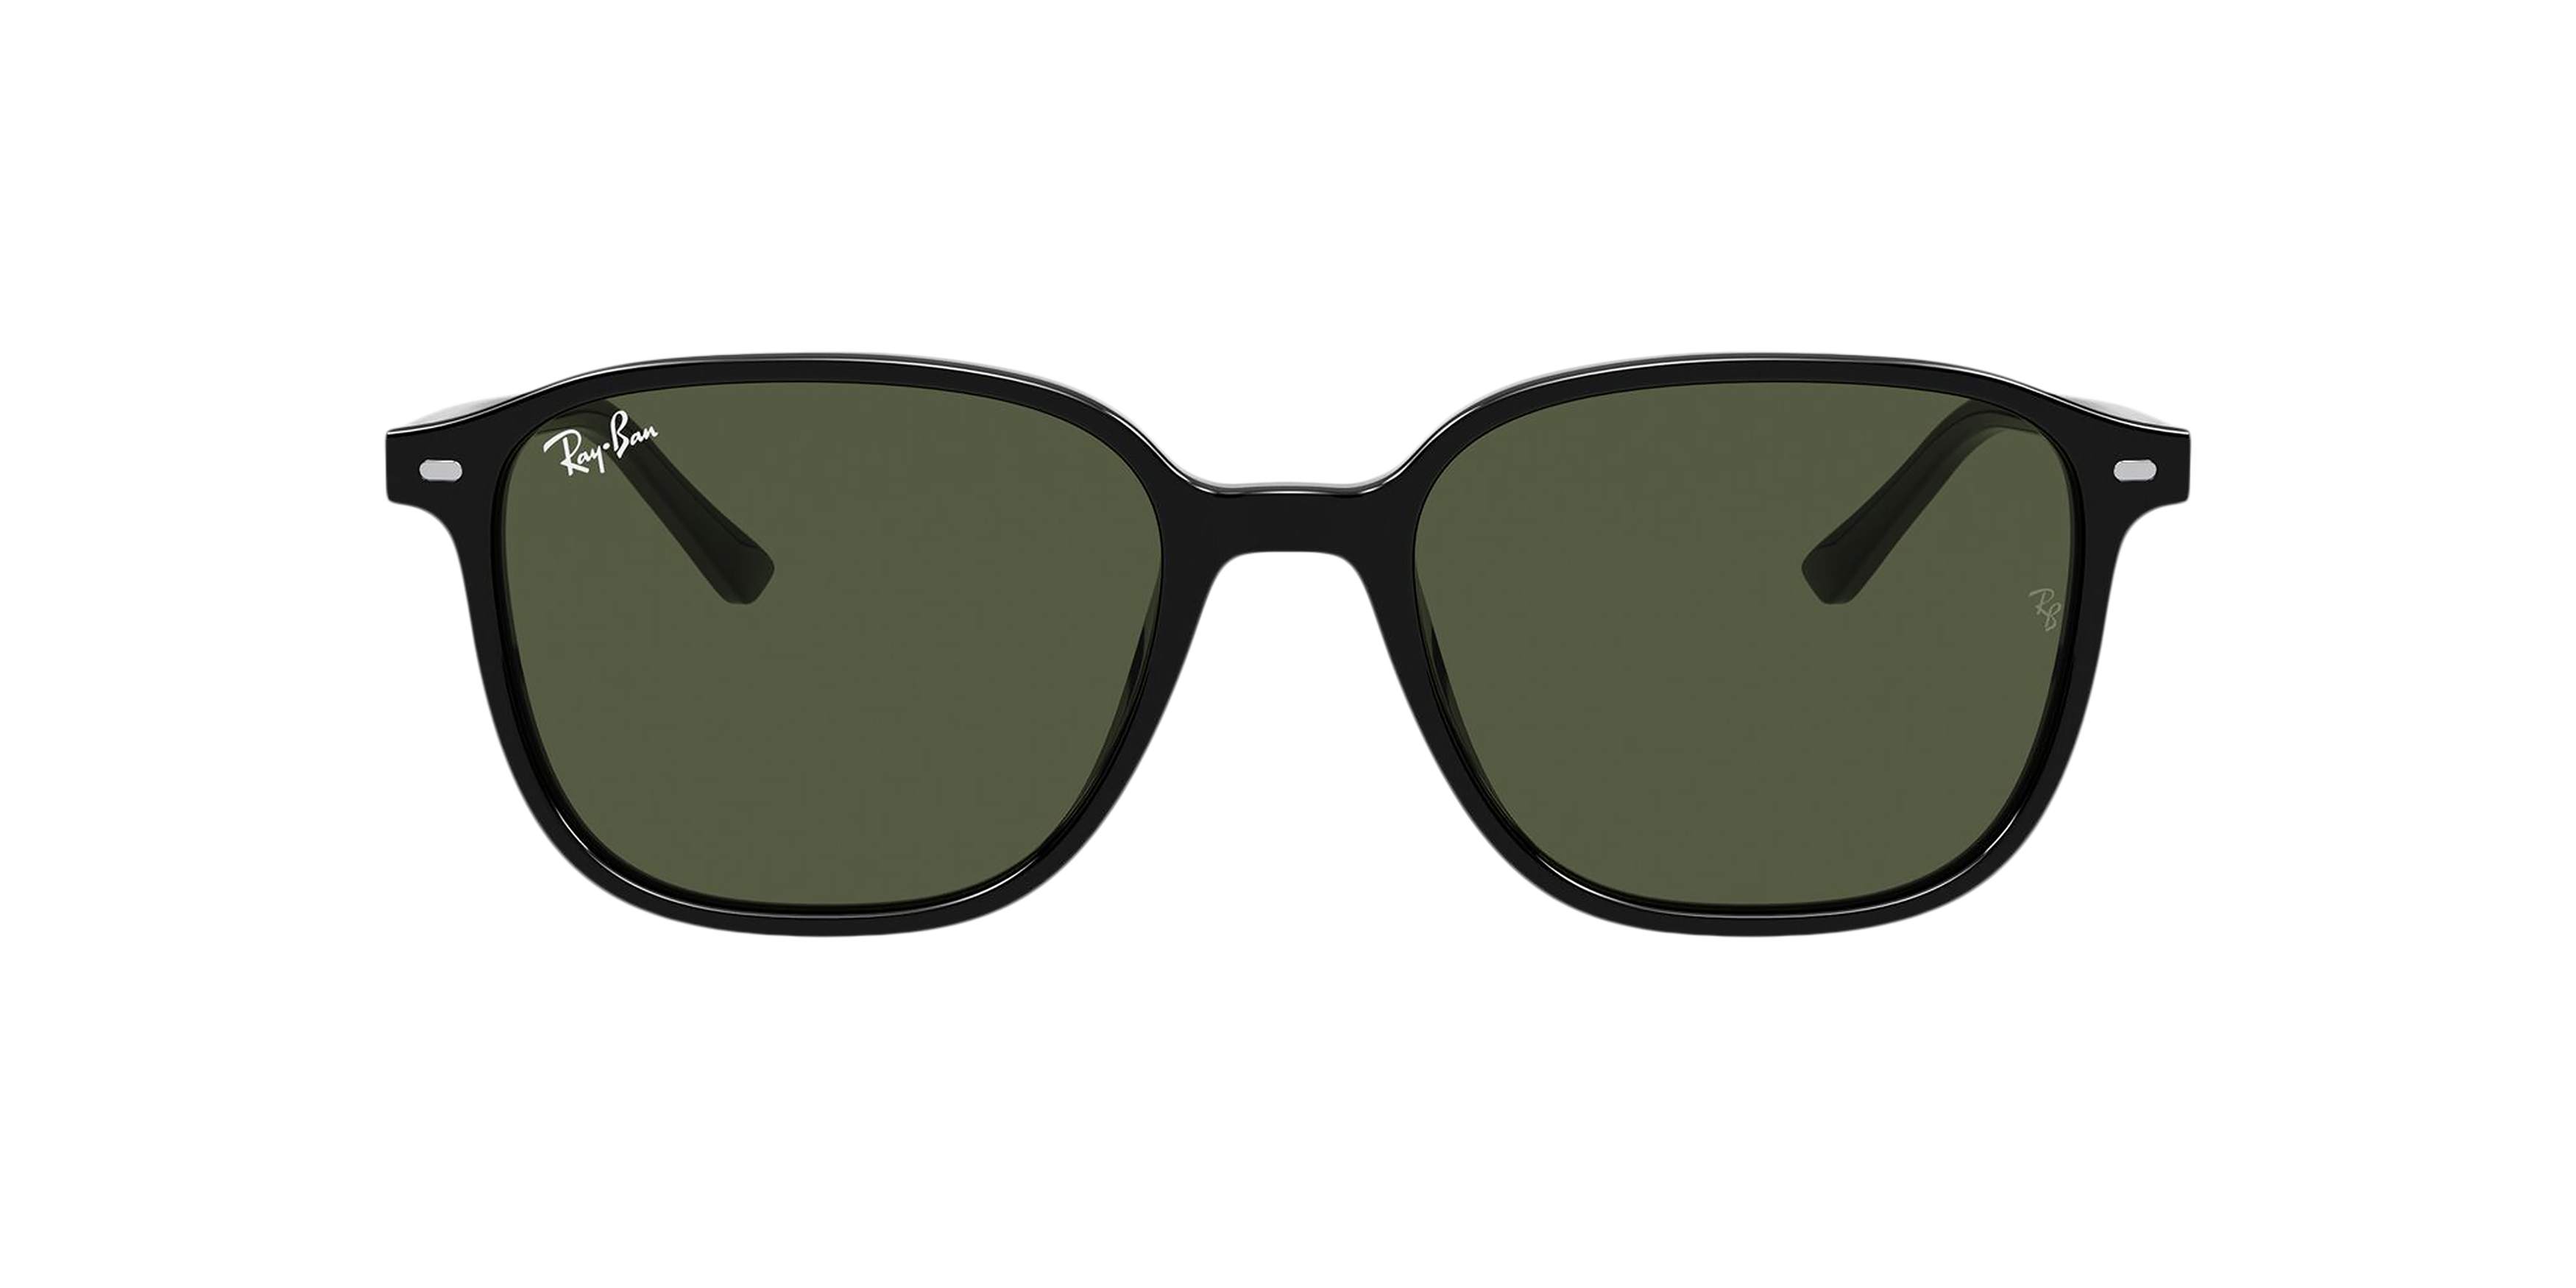 [products.image.front] Ray-Ban Leonard RB2193 901/31